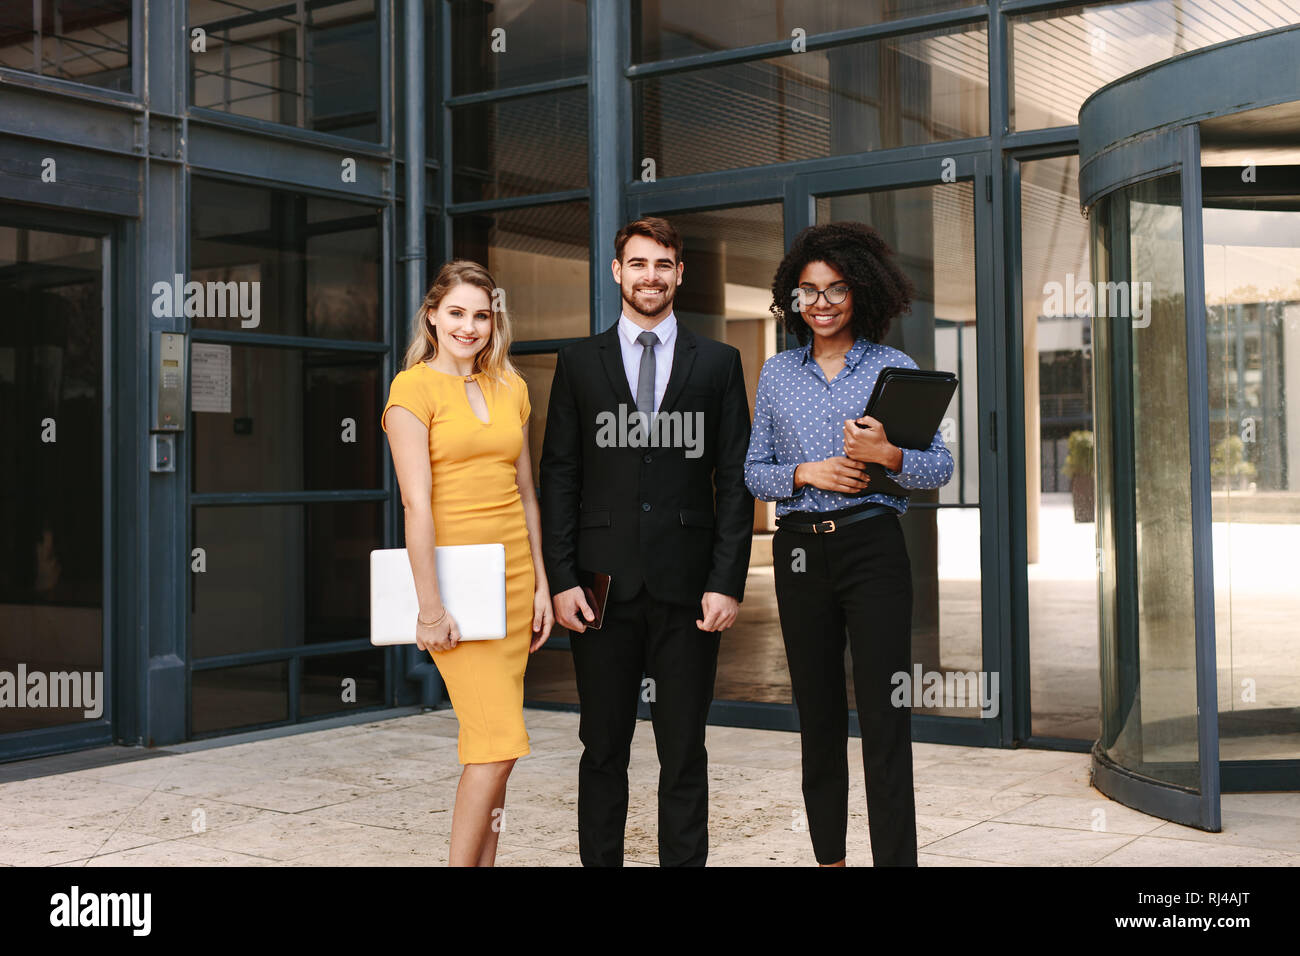 Successful young business colleagues standing together. businessman with female colleagues in corporate office building. Stock Photo